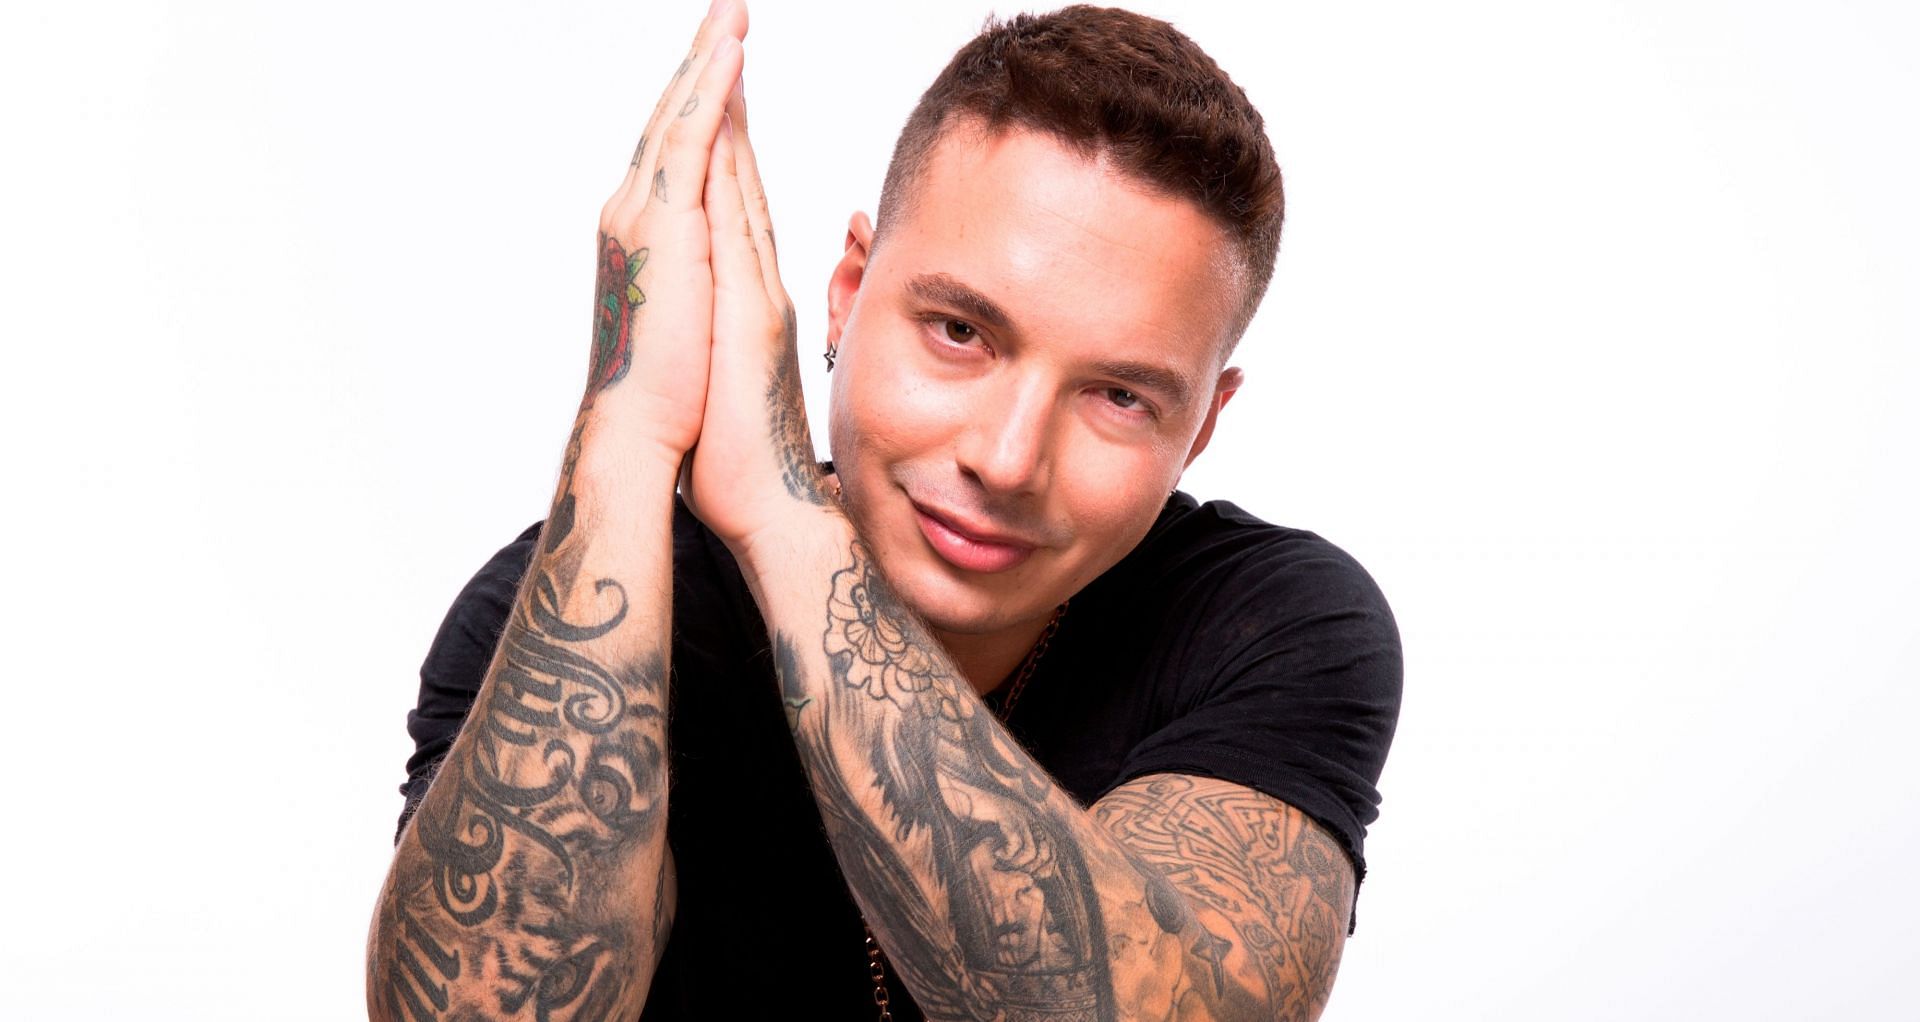 J Balvin Apologizes for 'Racist' Portrayal of Black Women in